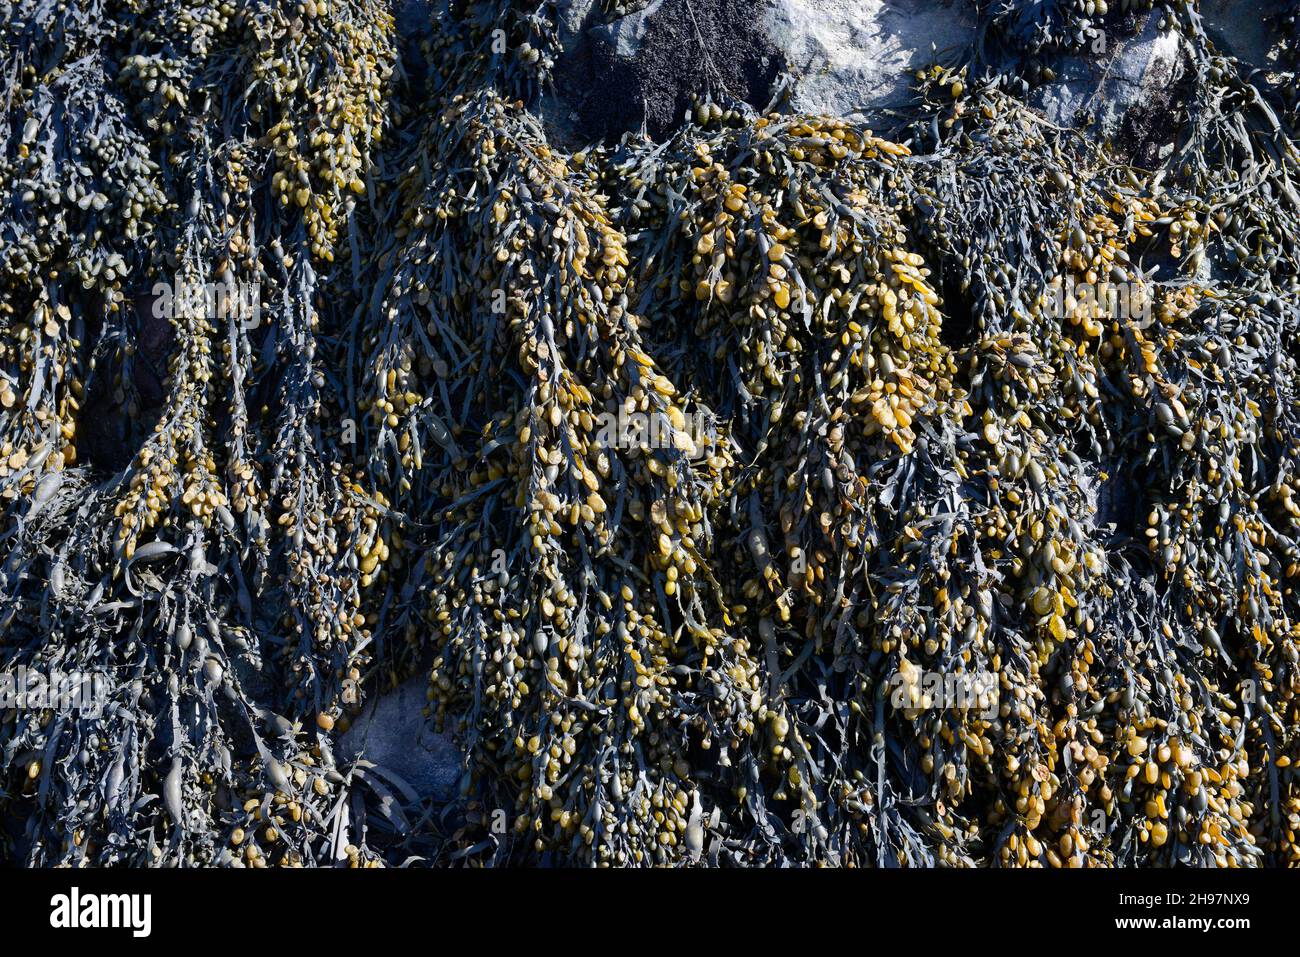 Bladder wrack seaweed exposed at low tide on the rocky shore at Barry Island, Wales, UK Stock Photo